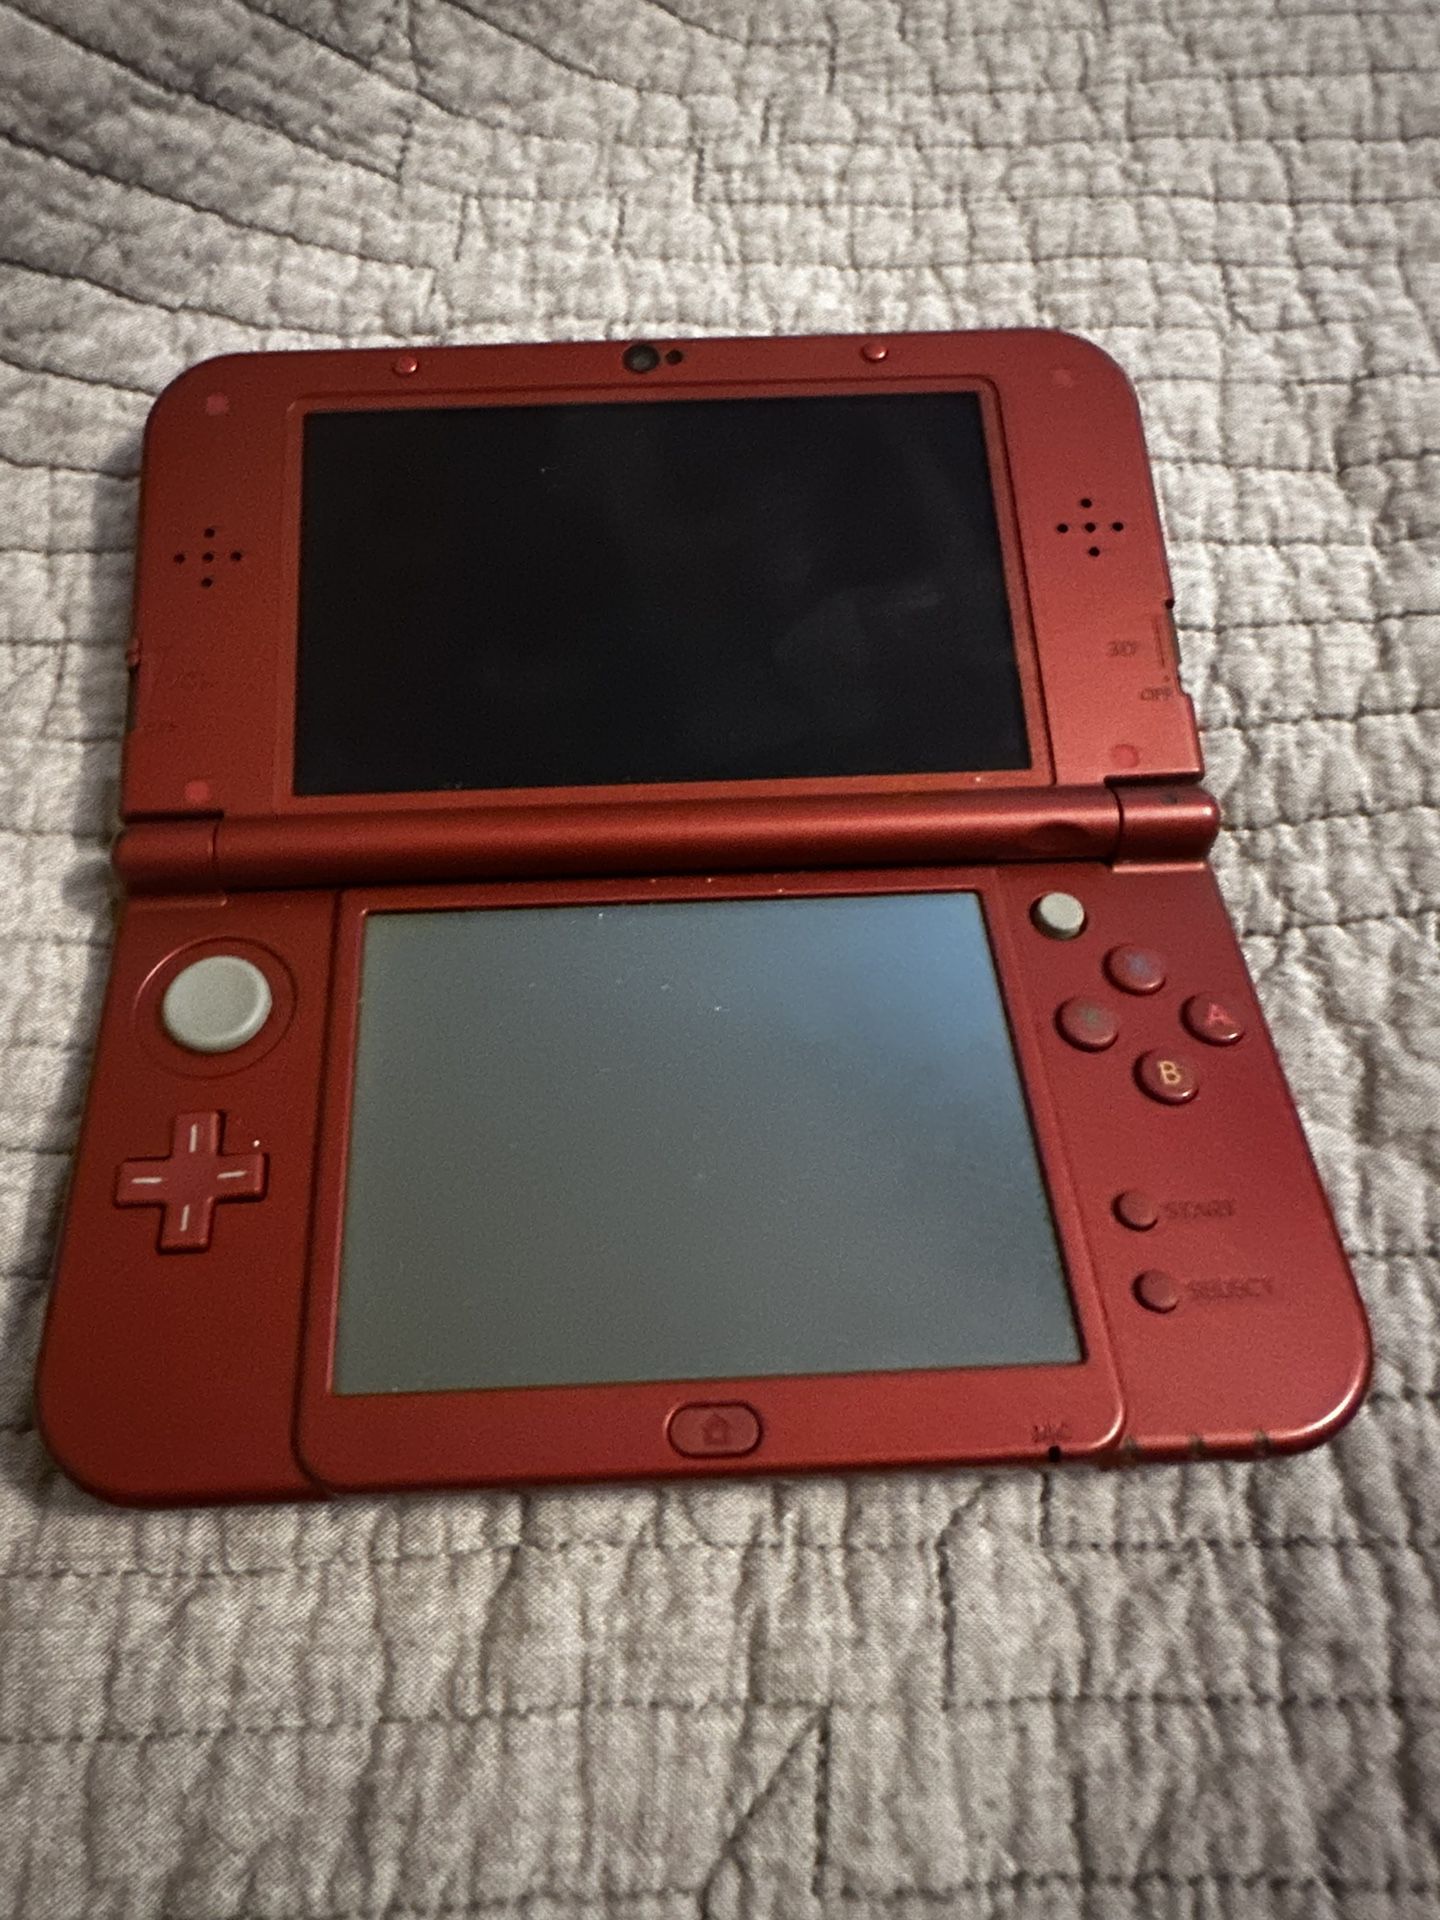 The Nintendo new 3DS XL